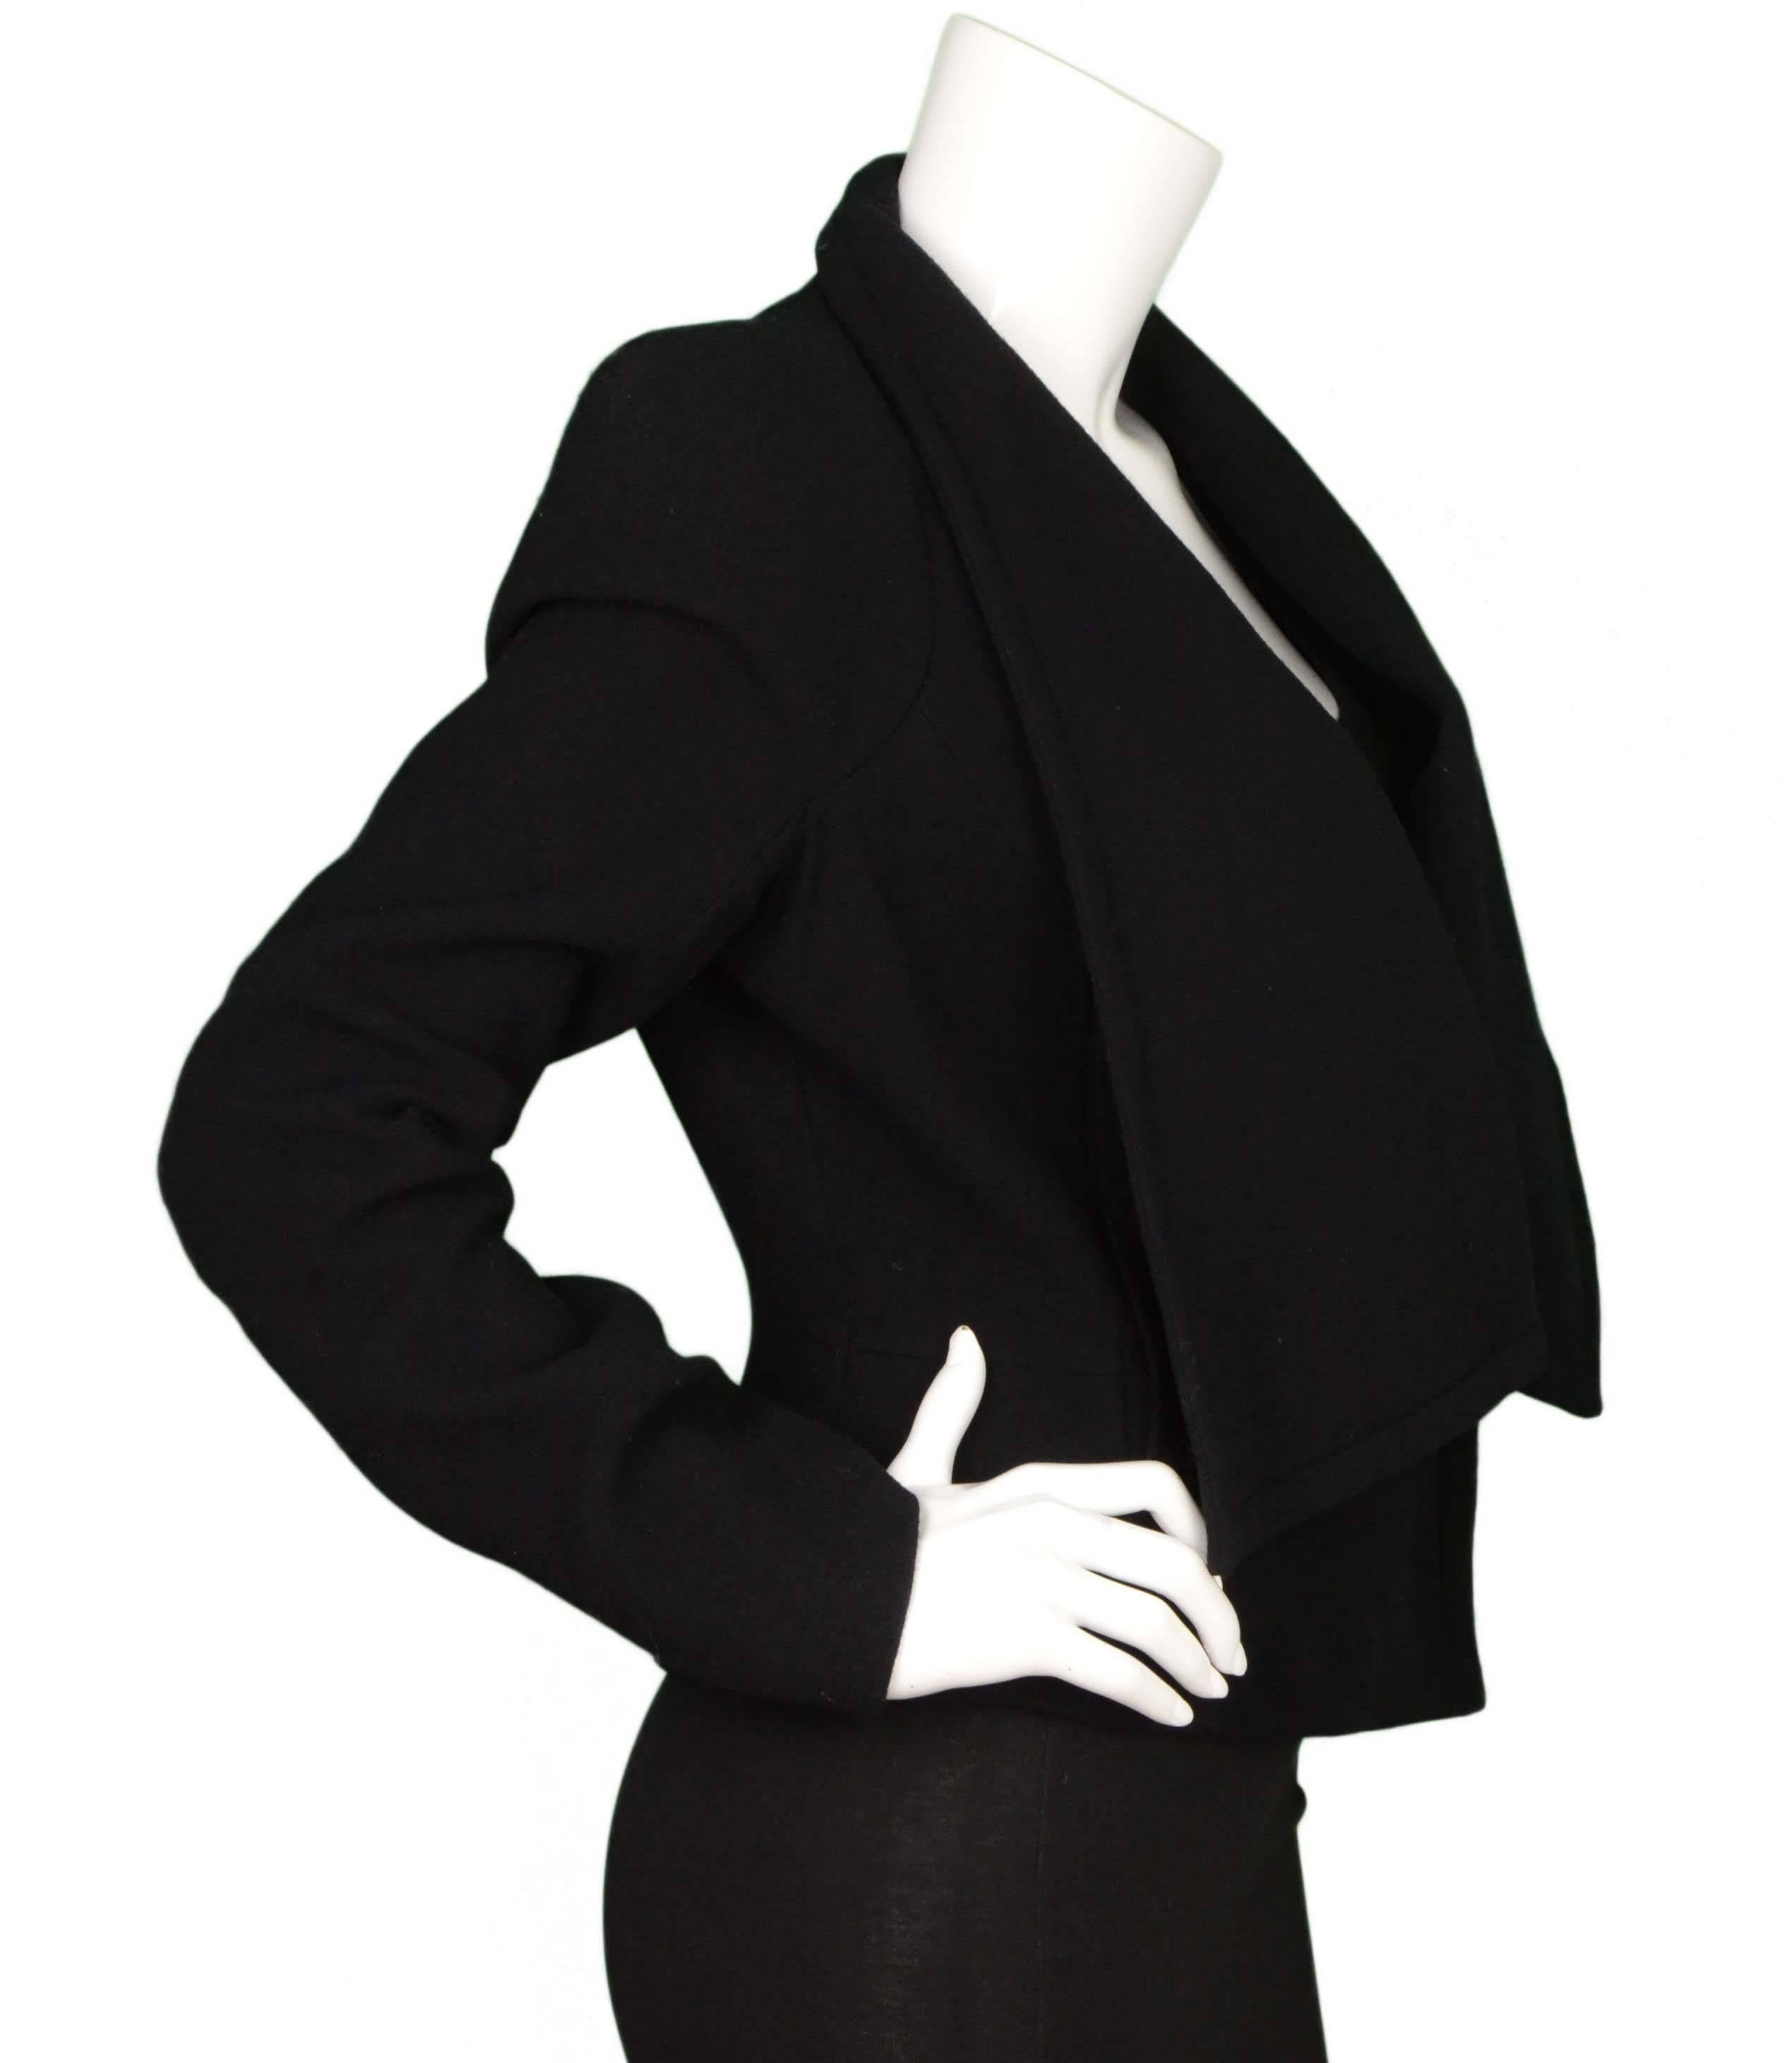 Givenchy Black Wool Cropped Coat 
Features structured padded shoulders and open waterfall front
Made In: Italy
Color: Black
Composition: 96% wool, 4% elastane
Lining: Black 100% Cupro
Closure/Opening: Open front with hook and eye closure at